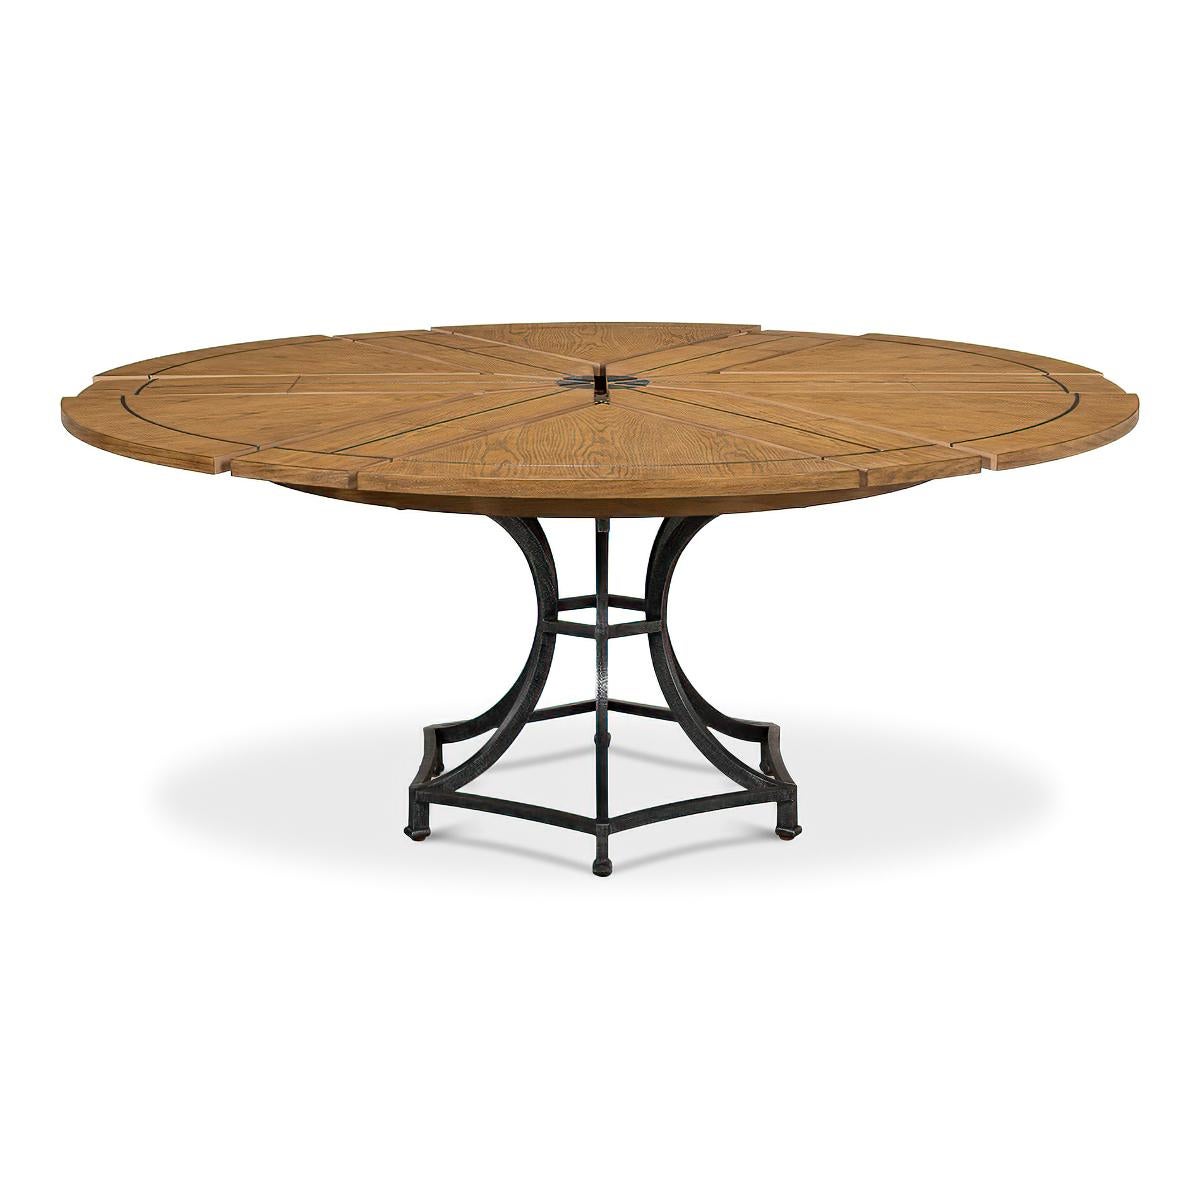 Contemporary Modern Industrial Round Dining Table - Warm Oak For Sale